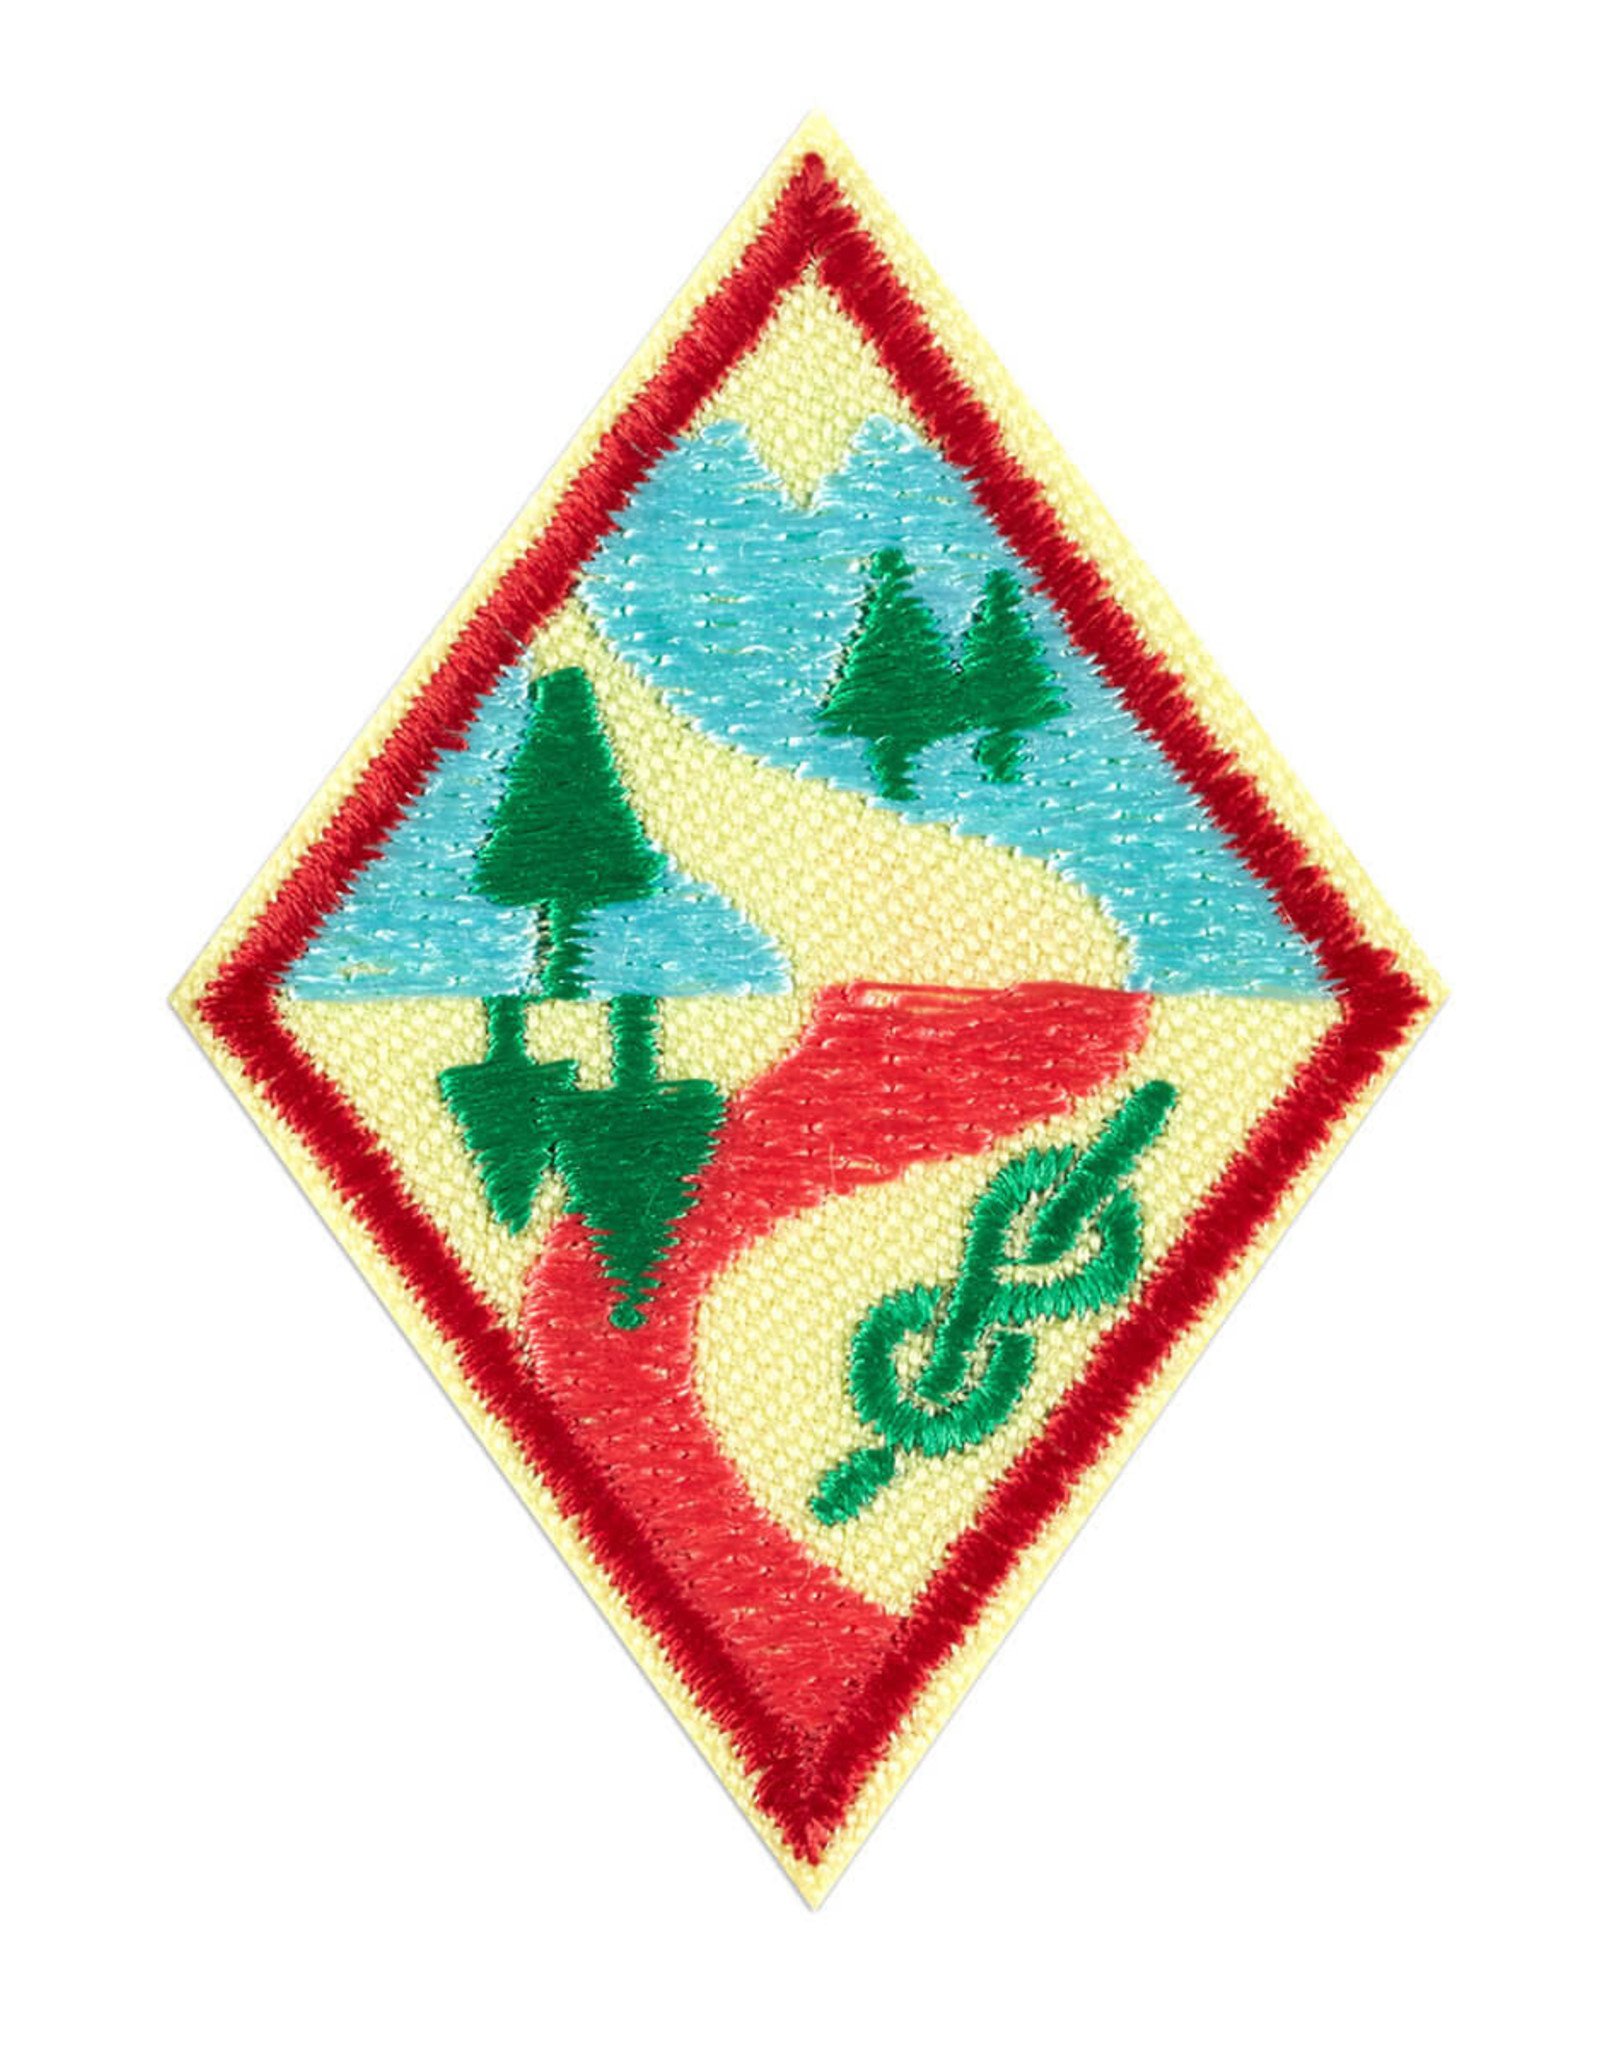 GIRL SCOUTS OF THE USA Cadette Snow or Climbing Adventure Badge